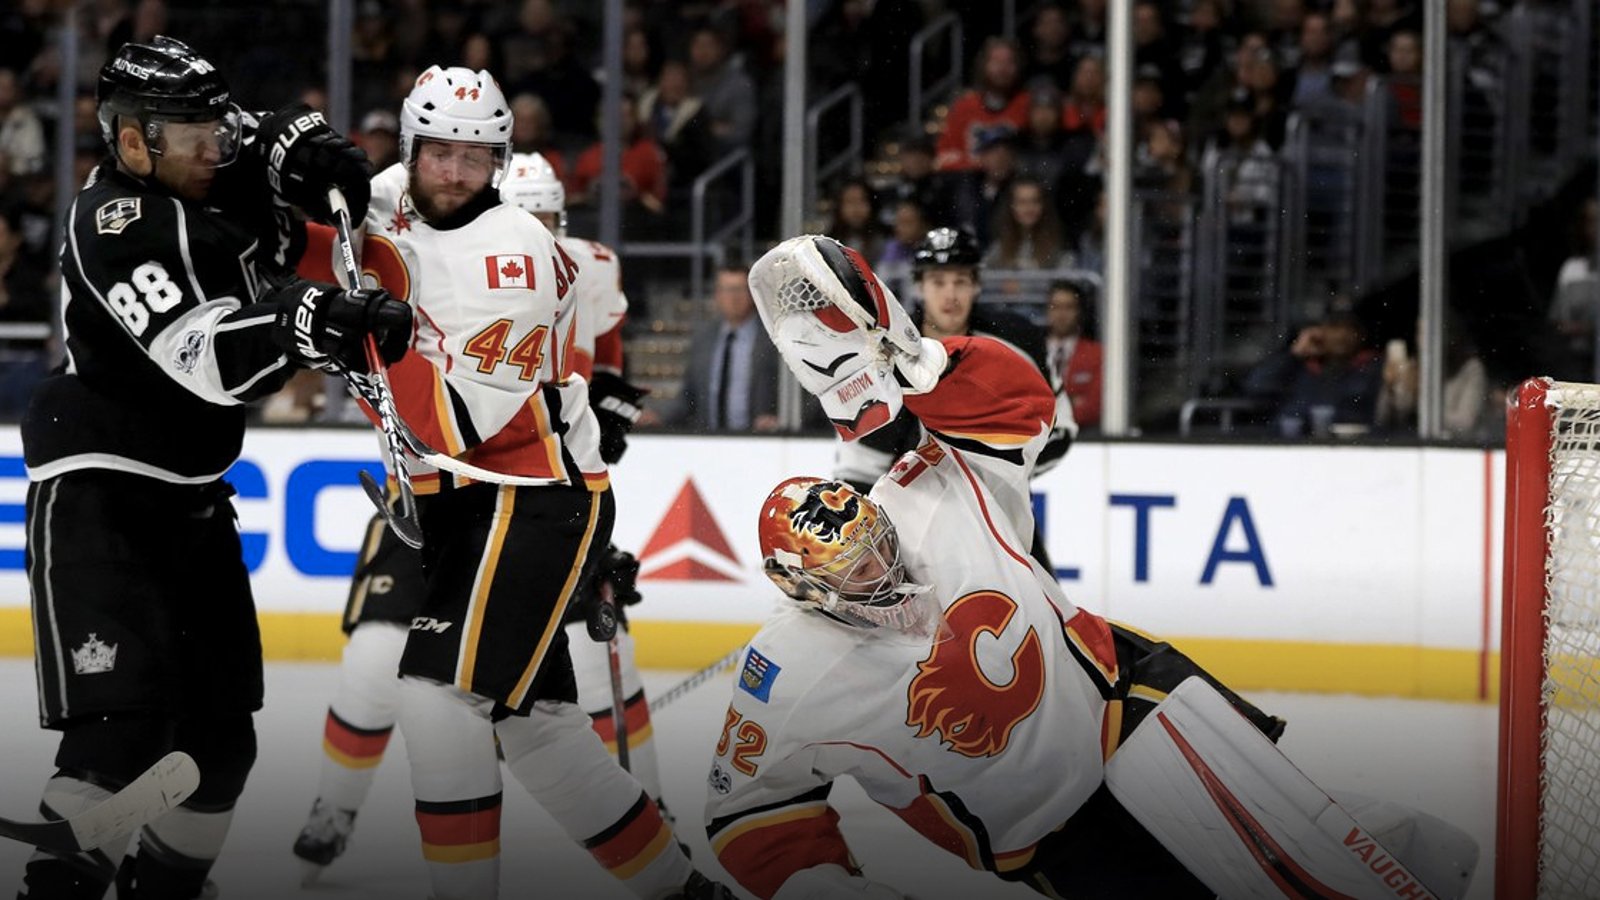 Breaking: AHL demotion signals return of Mike Smith